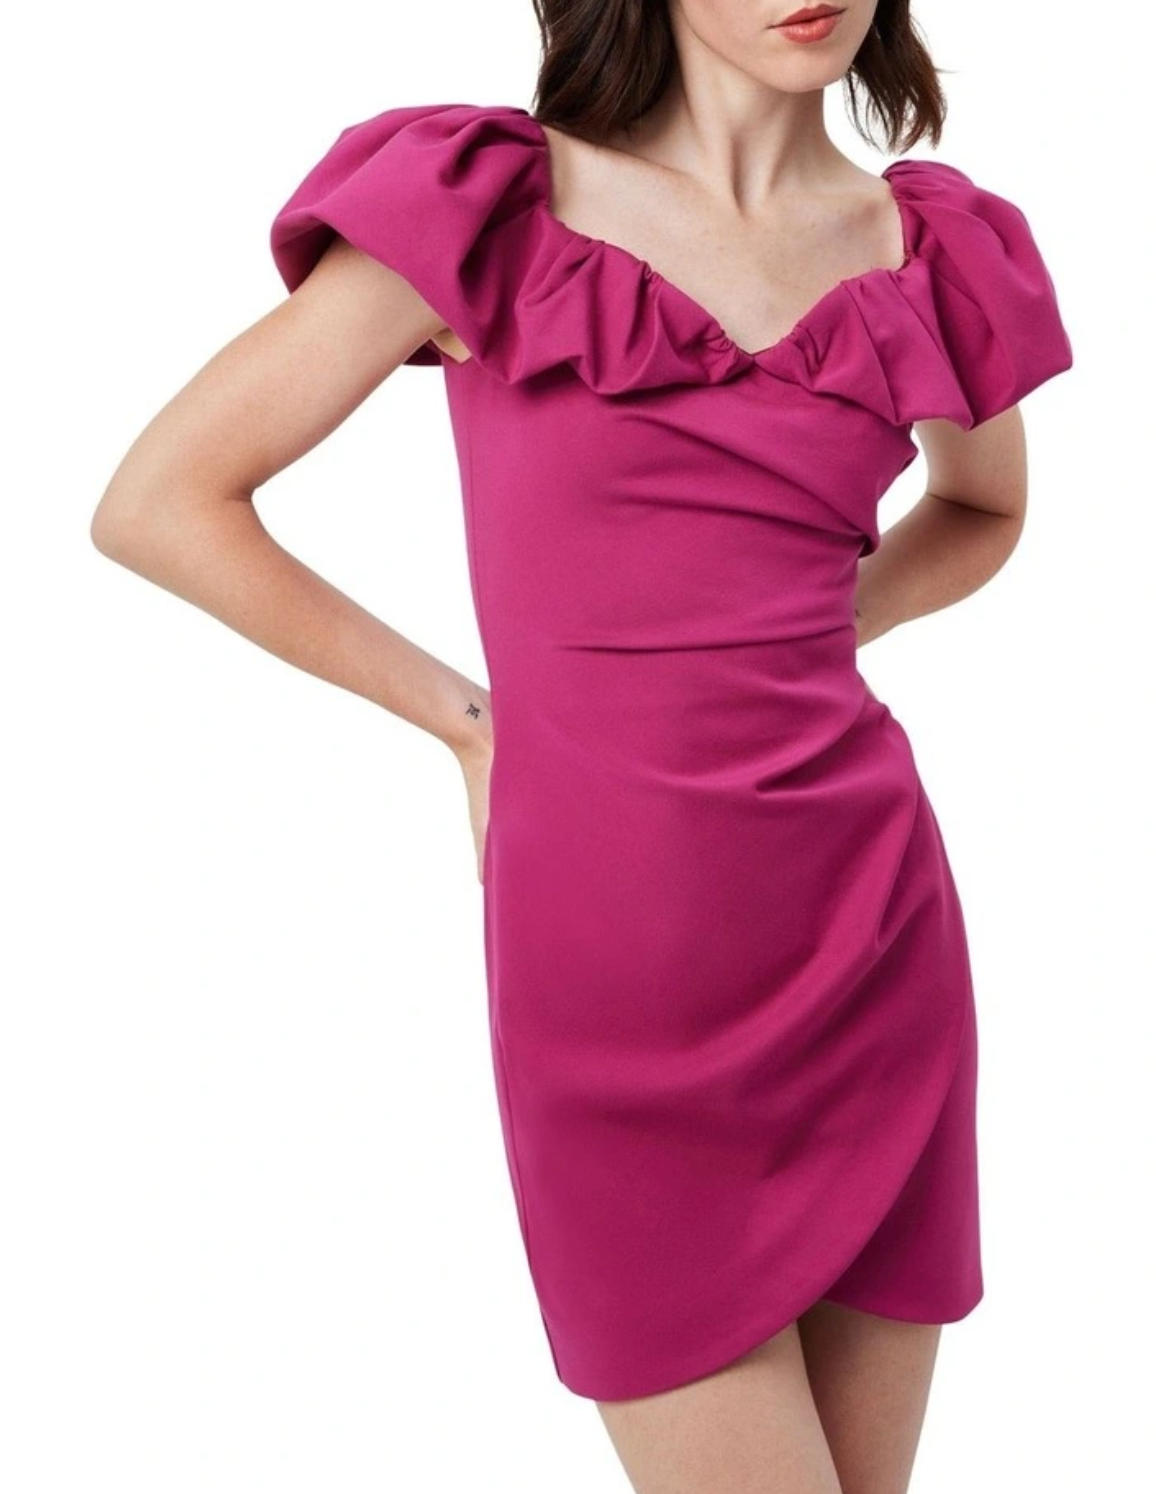 Sofia Dress in Orchid Pink